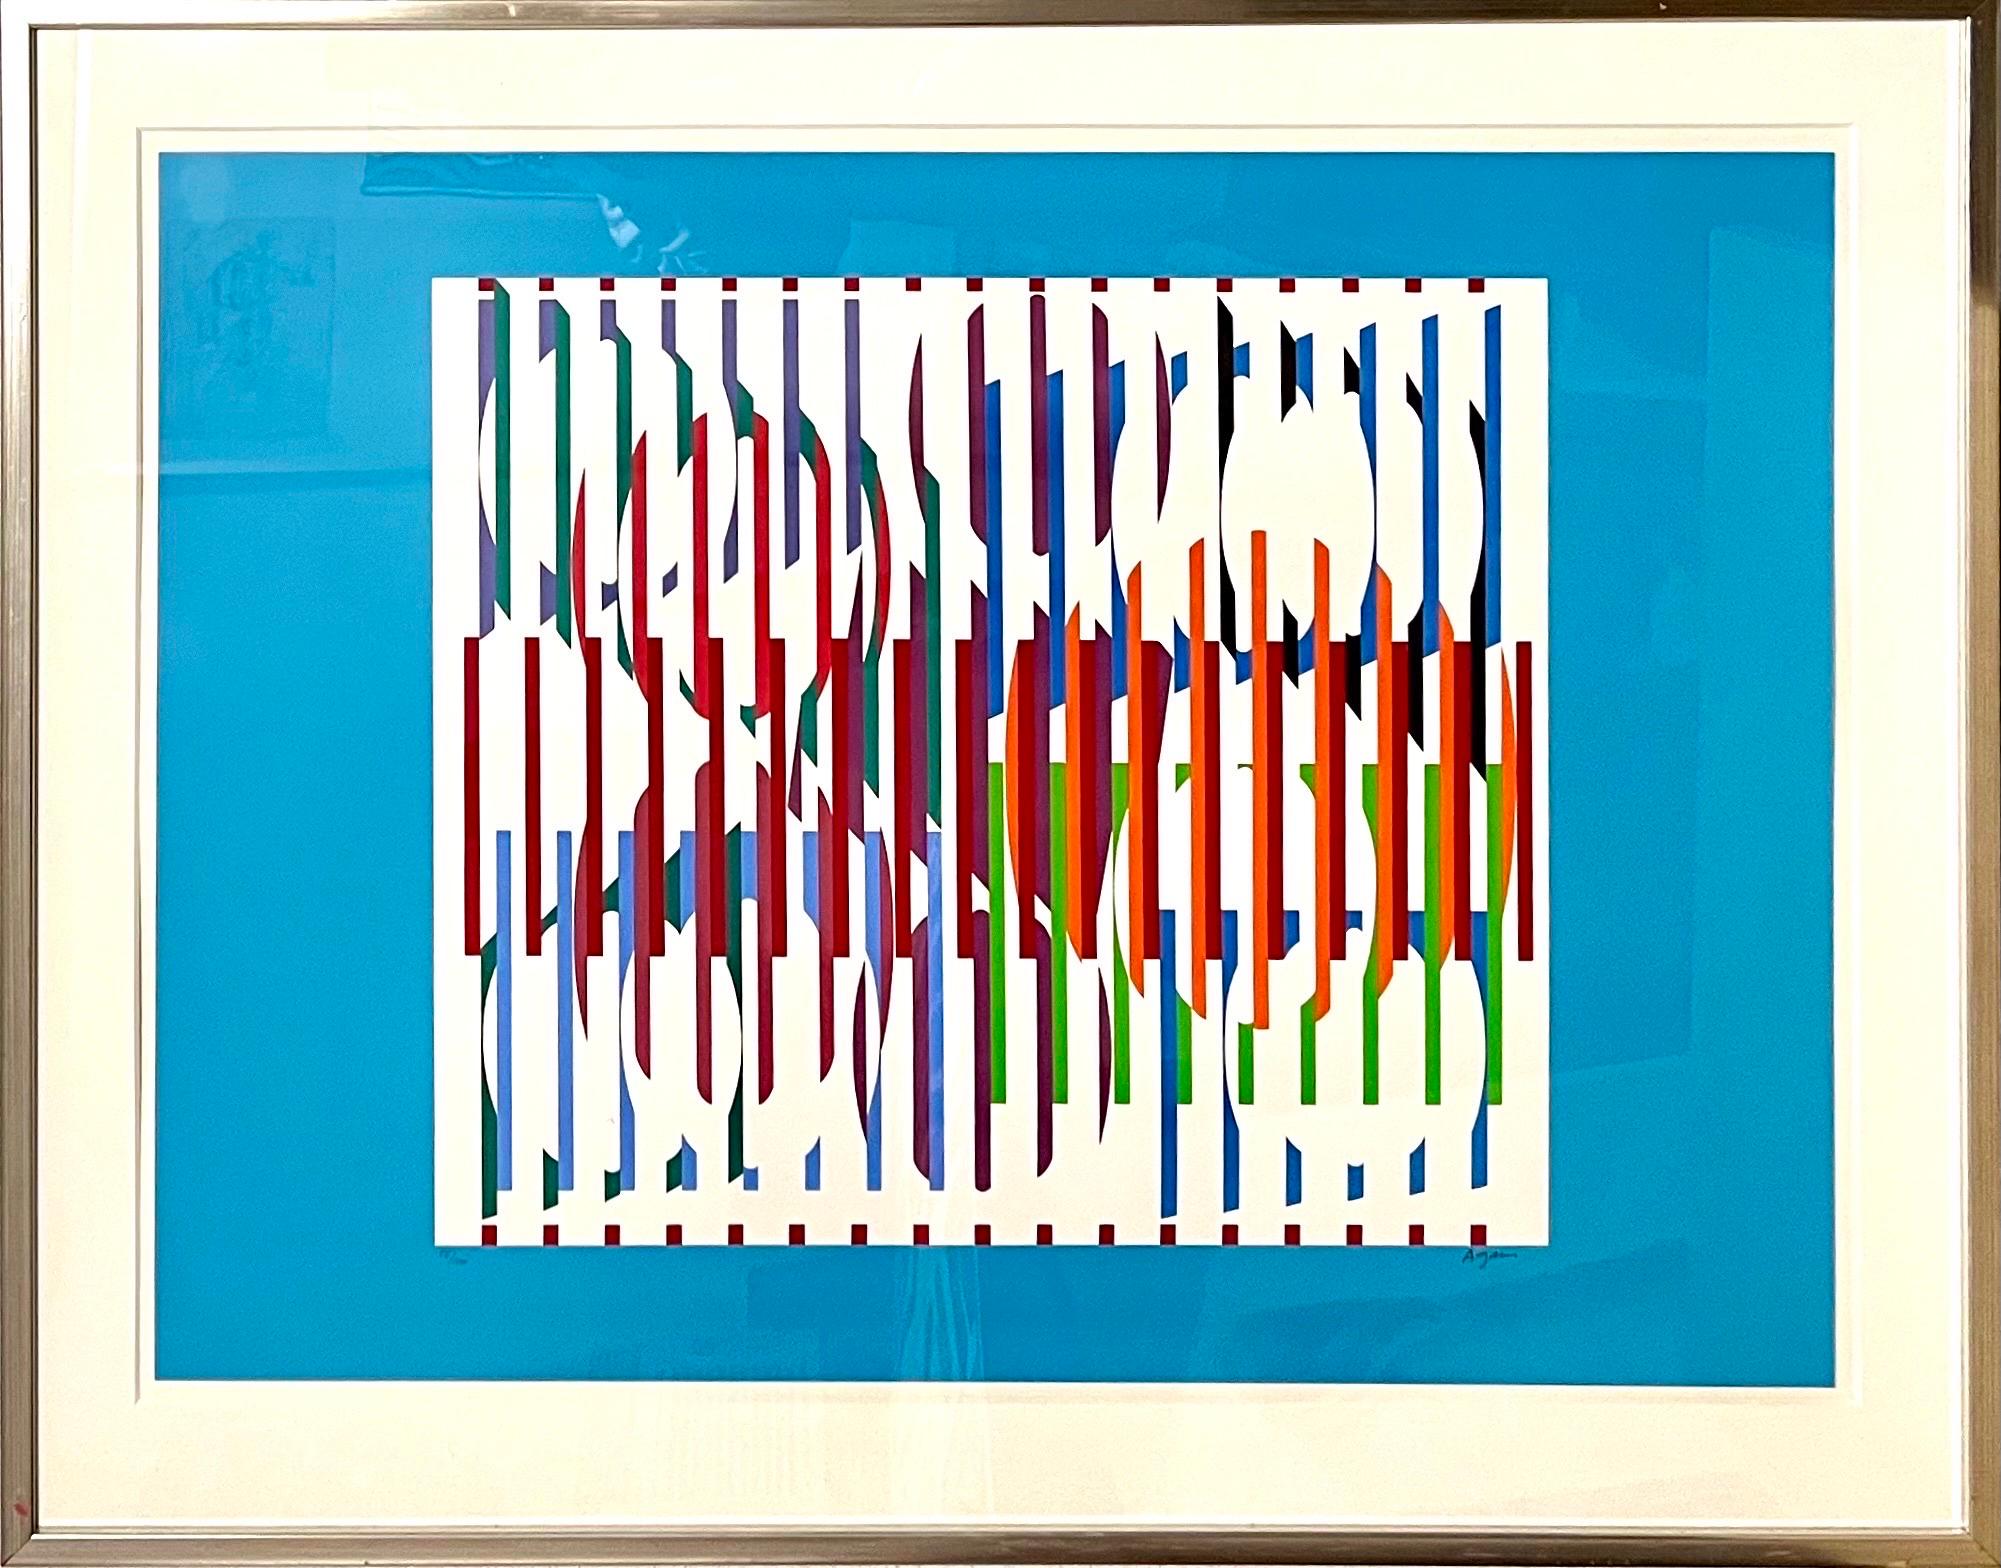 Yaacov Agam
Israeli (b. 1928)
Hommage aux Prix Nobel (1974) Serigraph
signed lower right, numbered 85/100
sheet: 22 x 29 3/4 inches
frame dimensions: 28 x 35 1/2 x 1 inches, wood frame with glazing

Provenance: Private Collection, Stockholm,